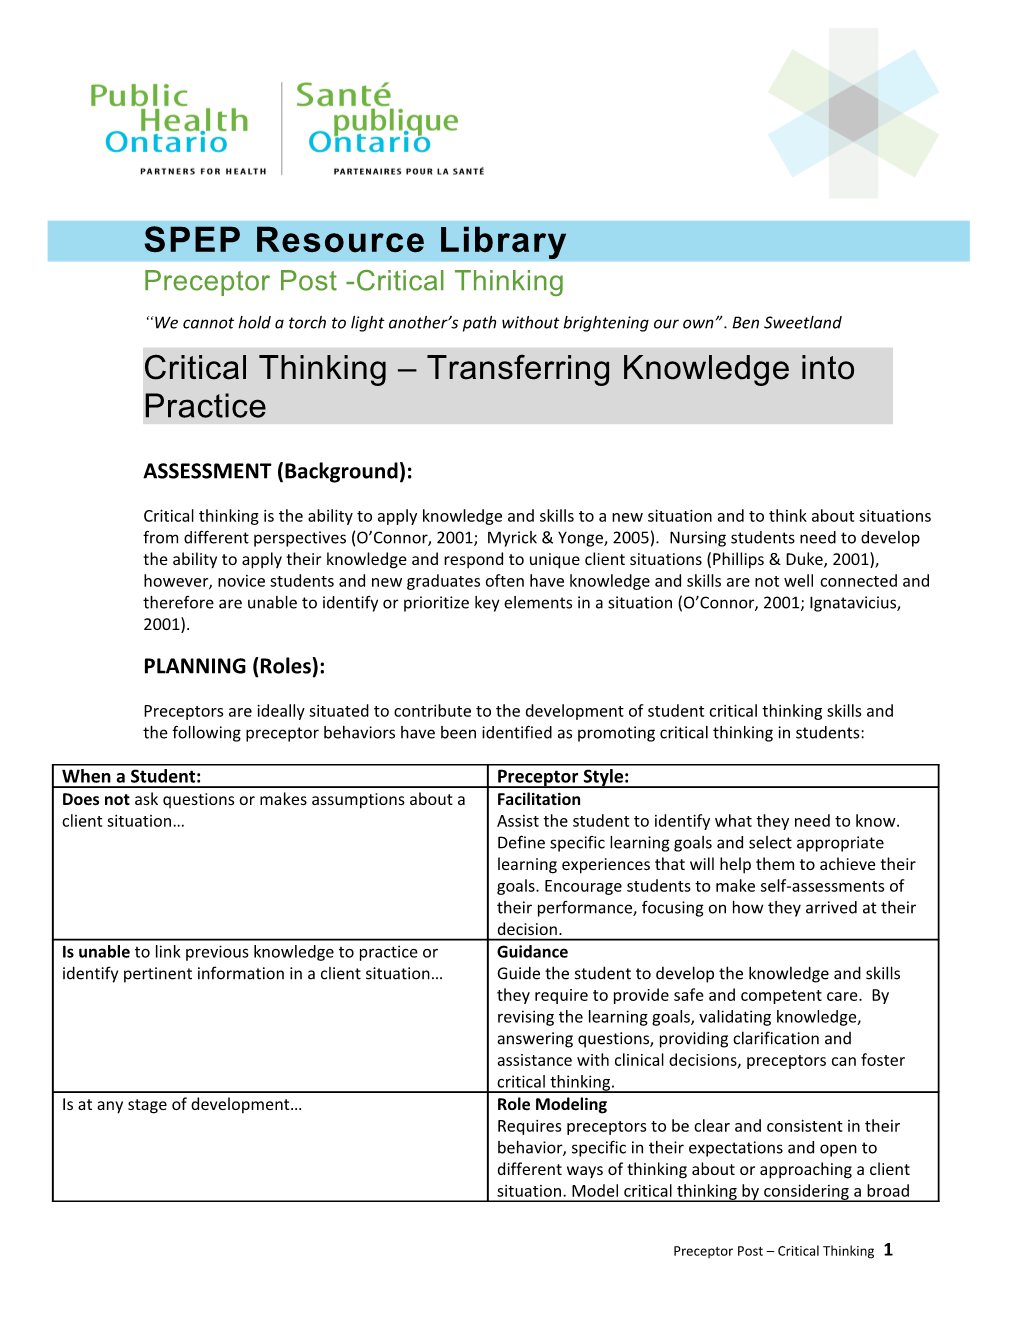 SPEP Resource Library: Critical Thinking: Transfering Knowledge Into Practice